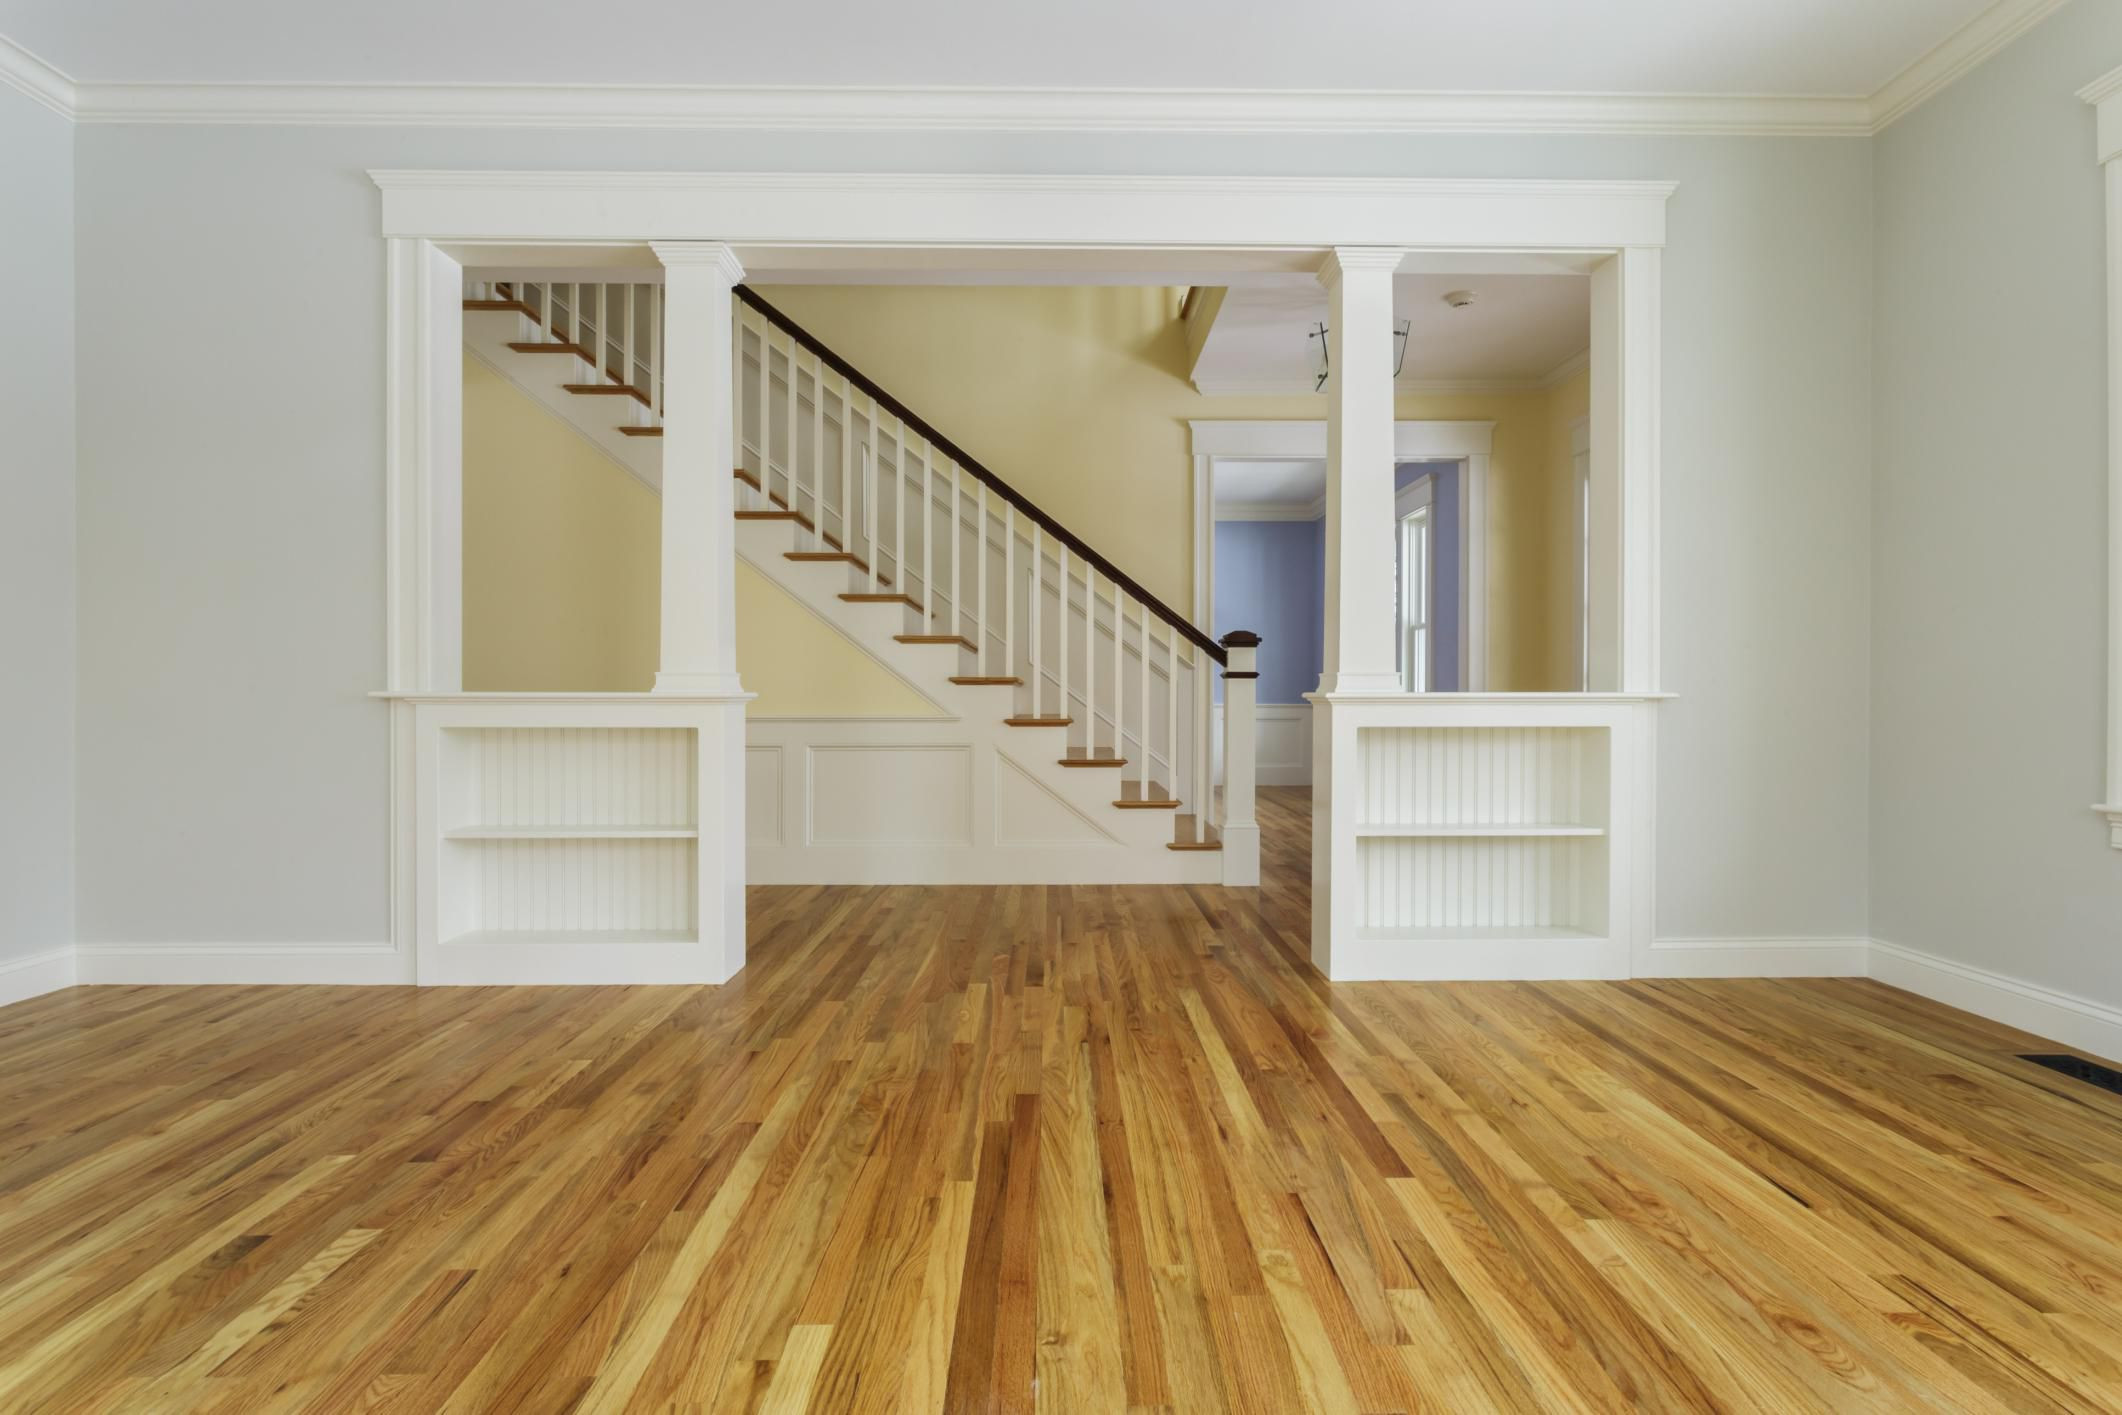 27 Lovely Restaining Hardwood Floors Darker Cost 2024 free download restaining hardwood floors darker cost of guide to solid hardwood floors in 168686571 56a49f213df78cf772834e24